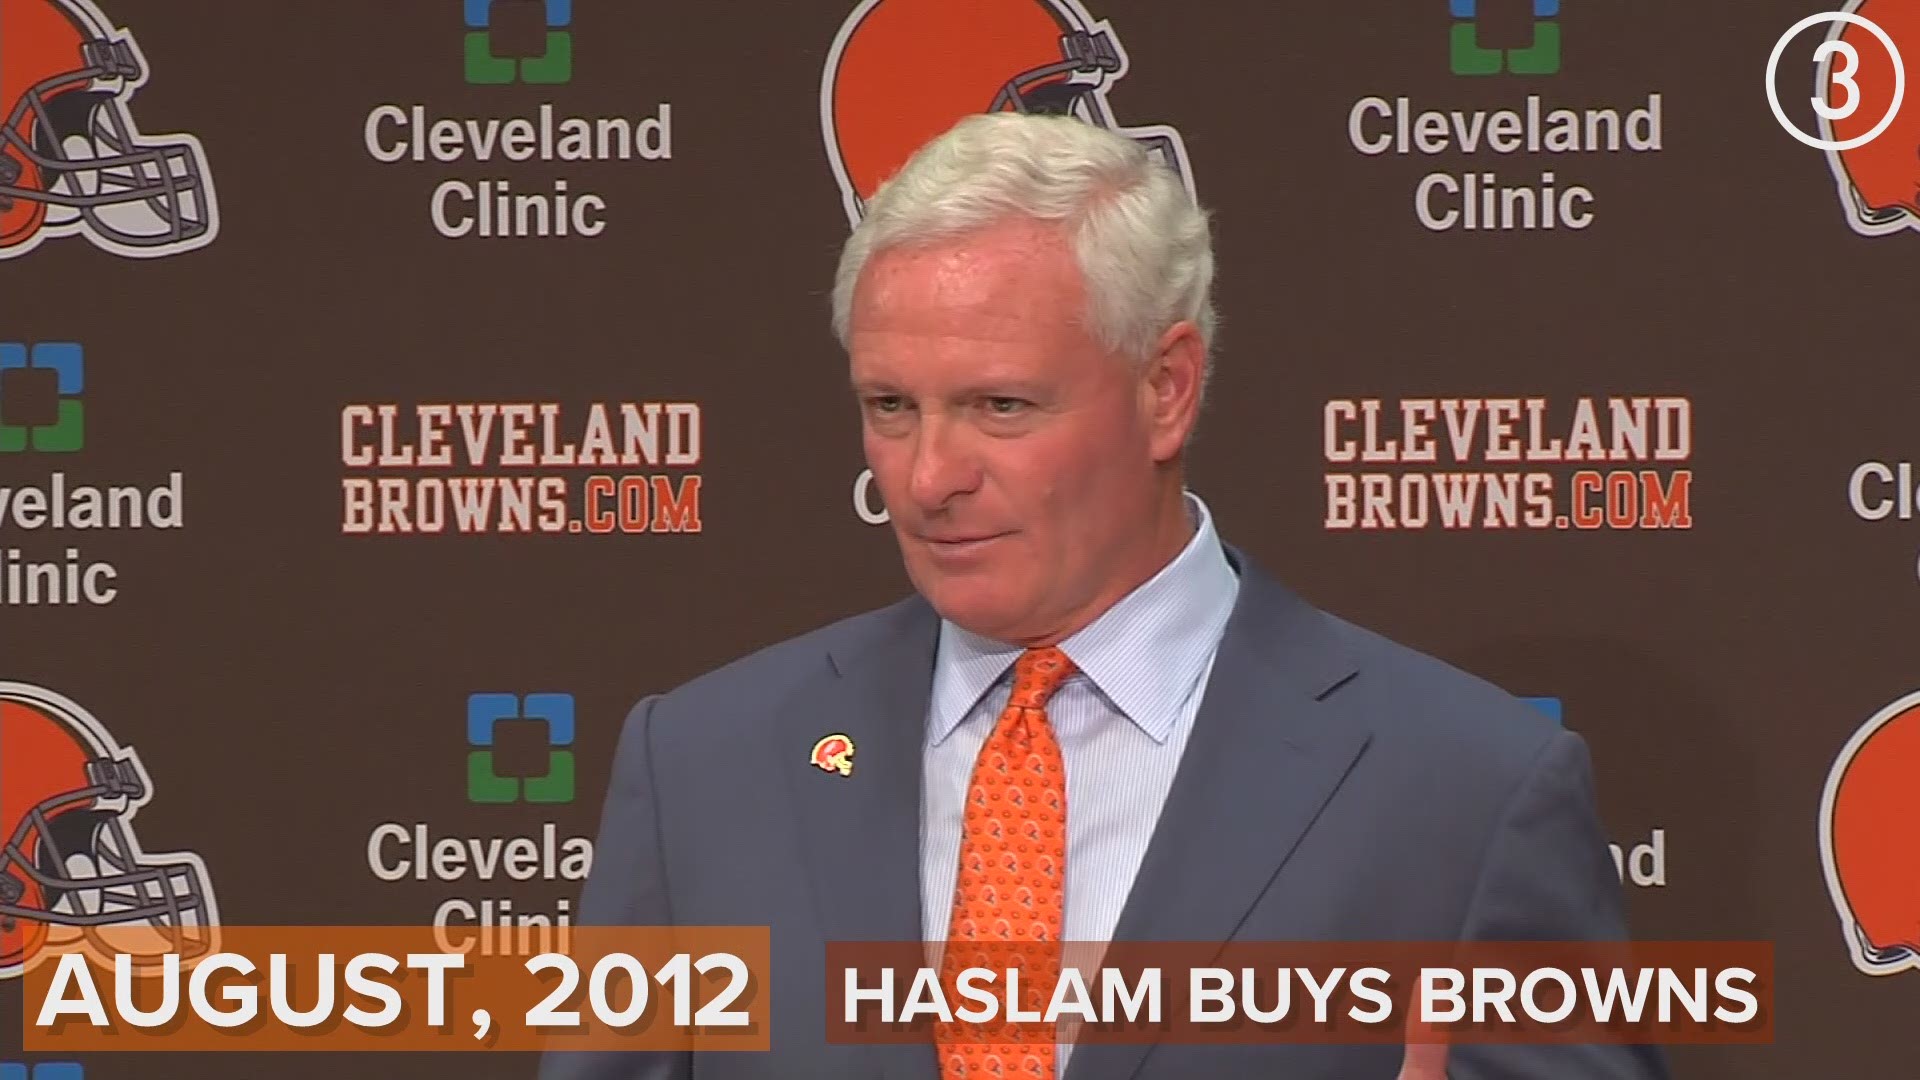 Here we go again!  Owner Jimmy Haslam says Browns will hire their head coach before GM.